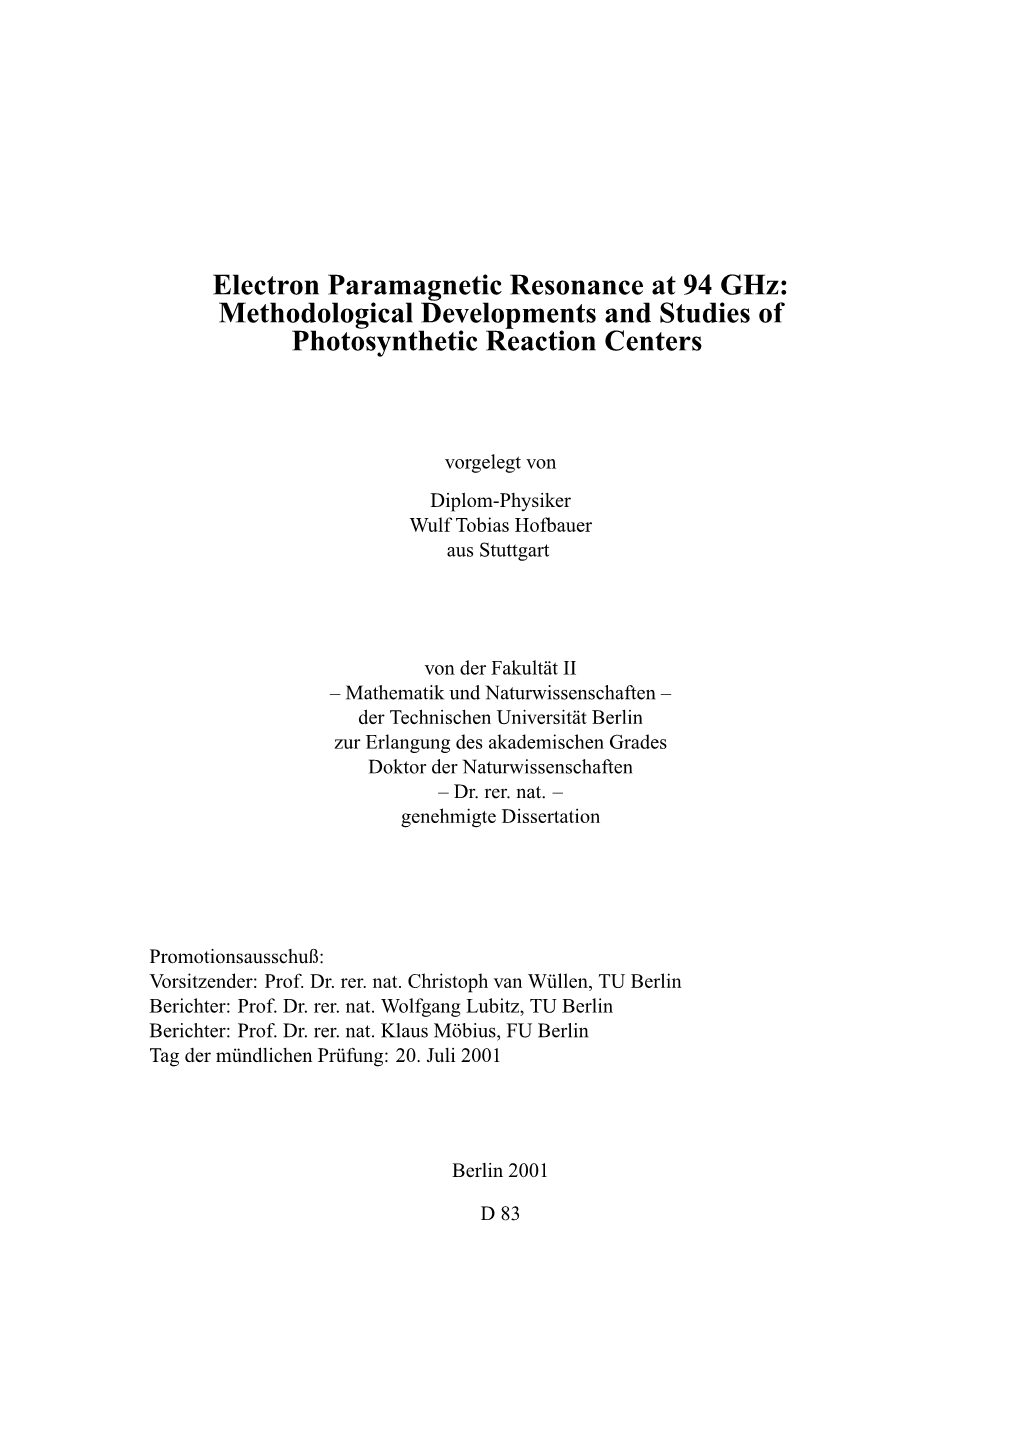 Electron Paramagnetic Resonance at 94 Ghz: Methodological Developments and Studies of Photosynthetic Reaction Centers